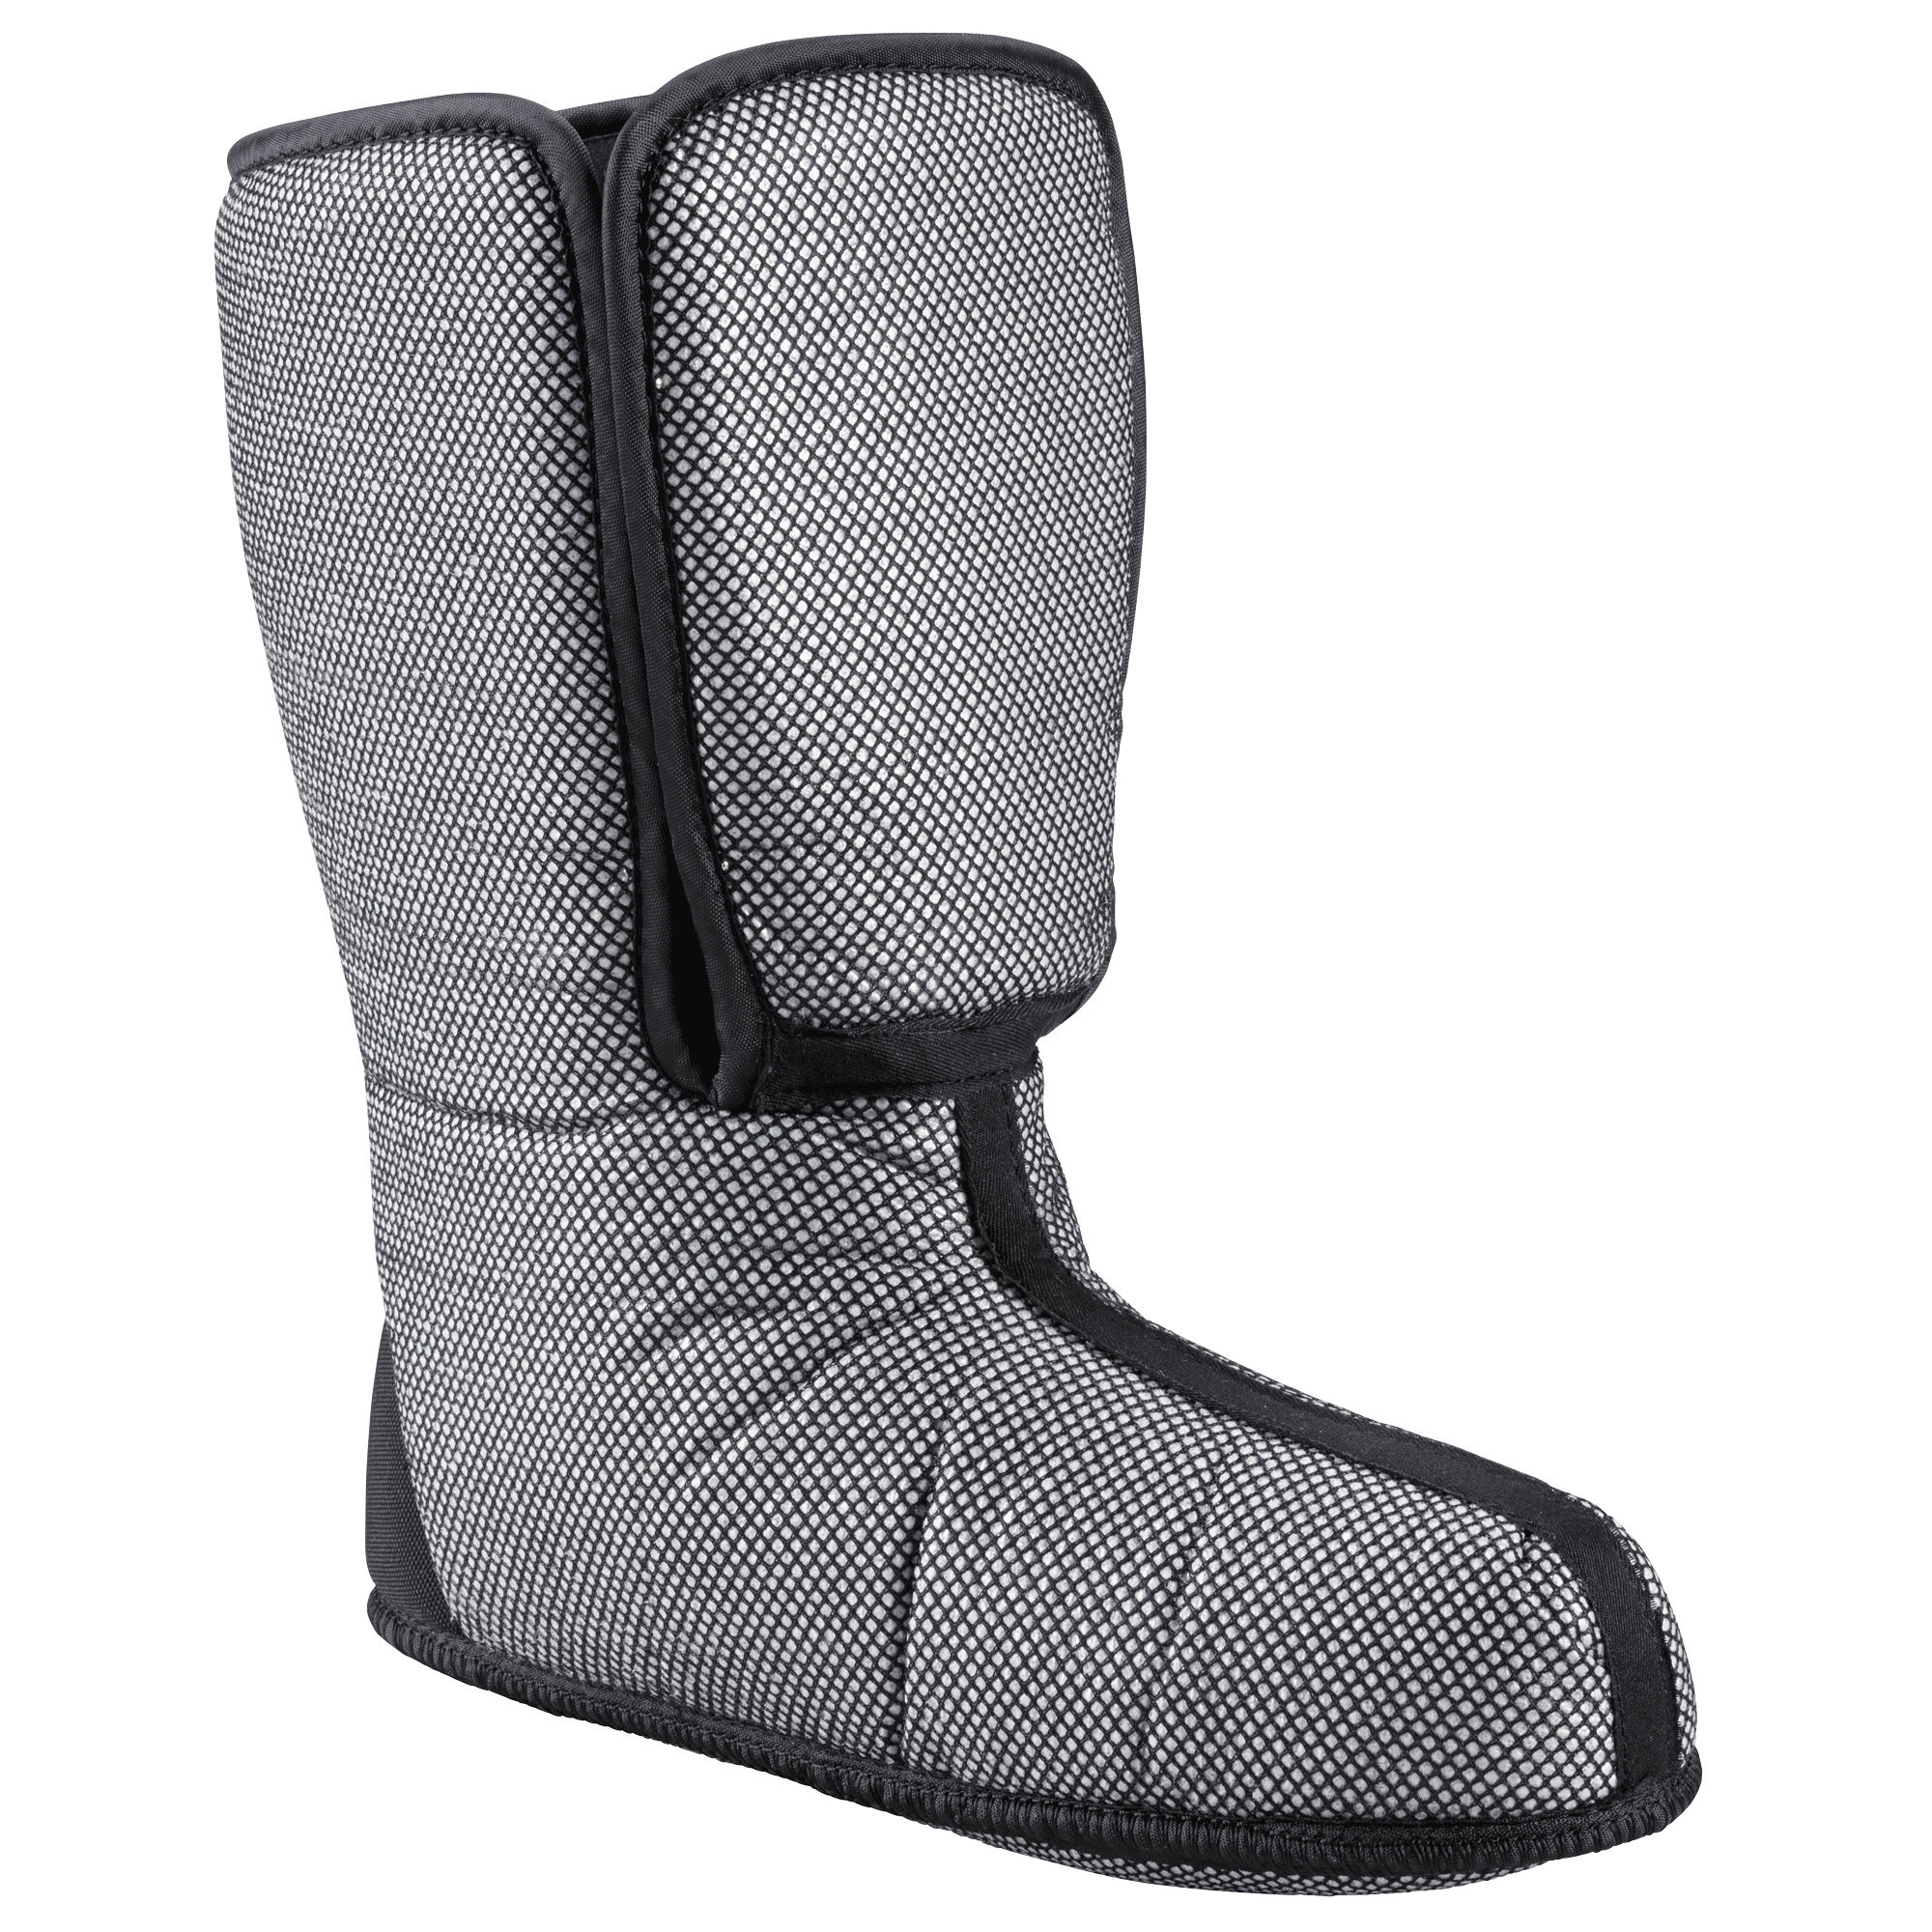 ICE CASTLE  Kids Boot – Baffin - Born in the North '79